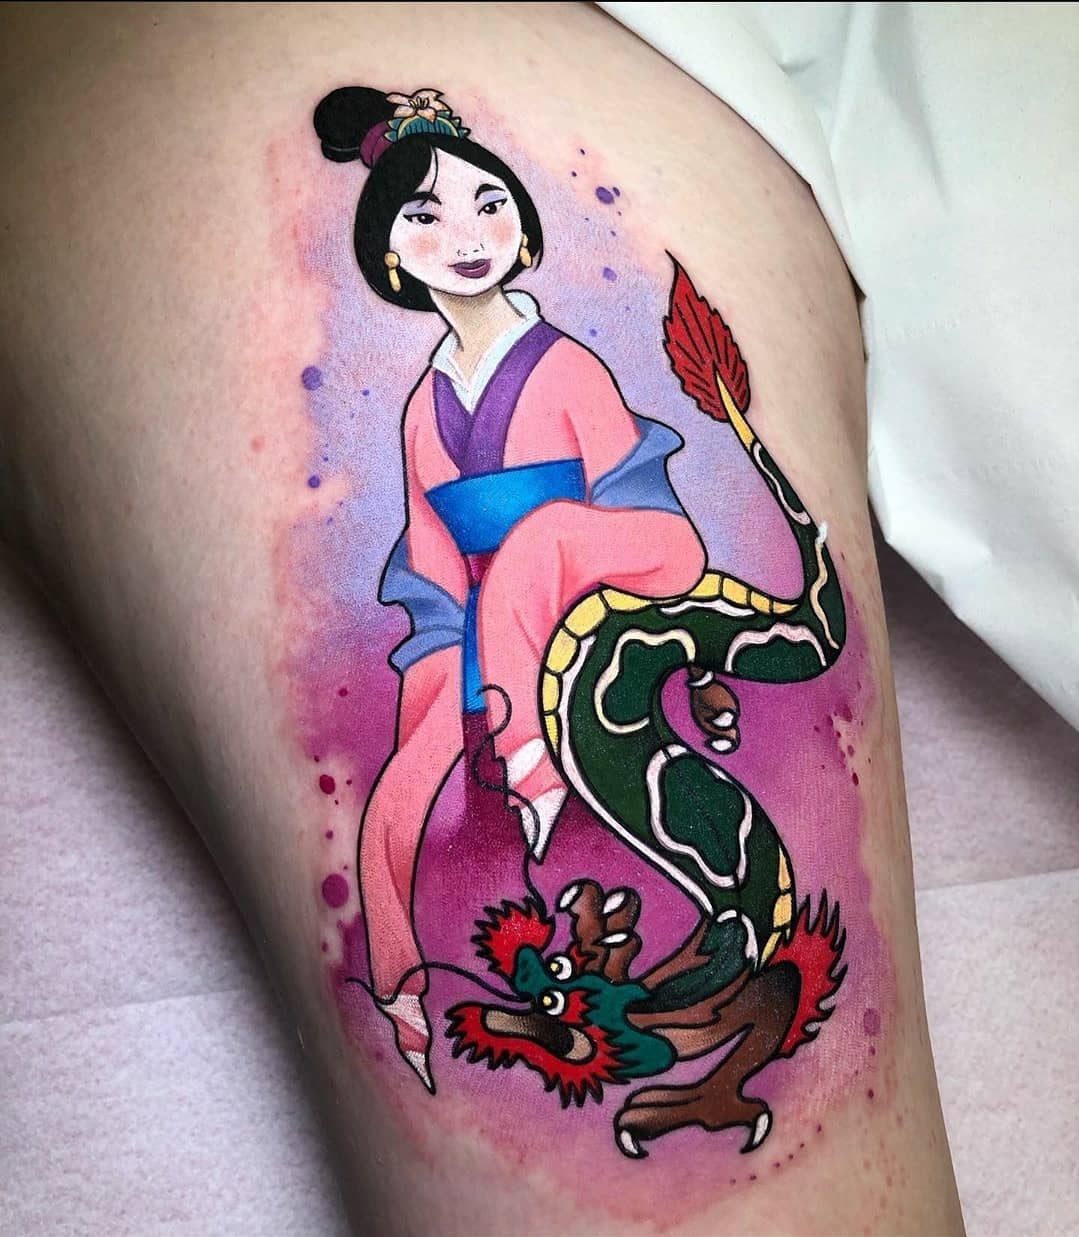 Freshly inked Mulan by Noemi for the lovely Nichole! Always nice to see Noemi mixing up styles and creating something completely unique. 